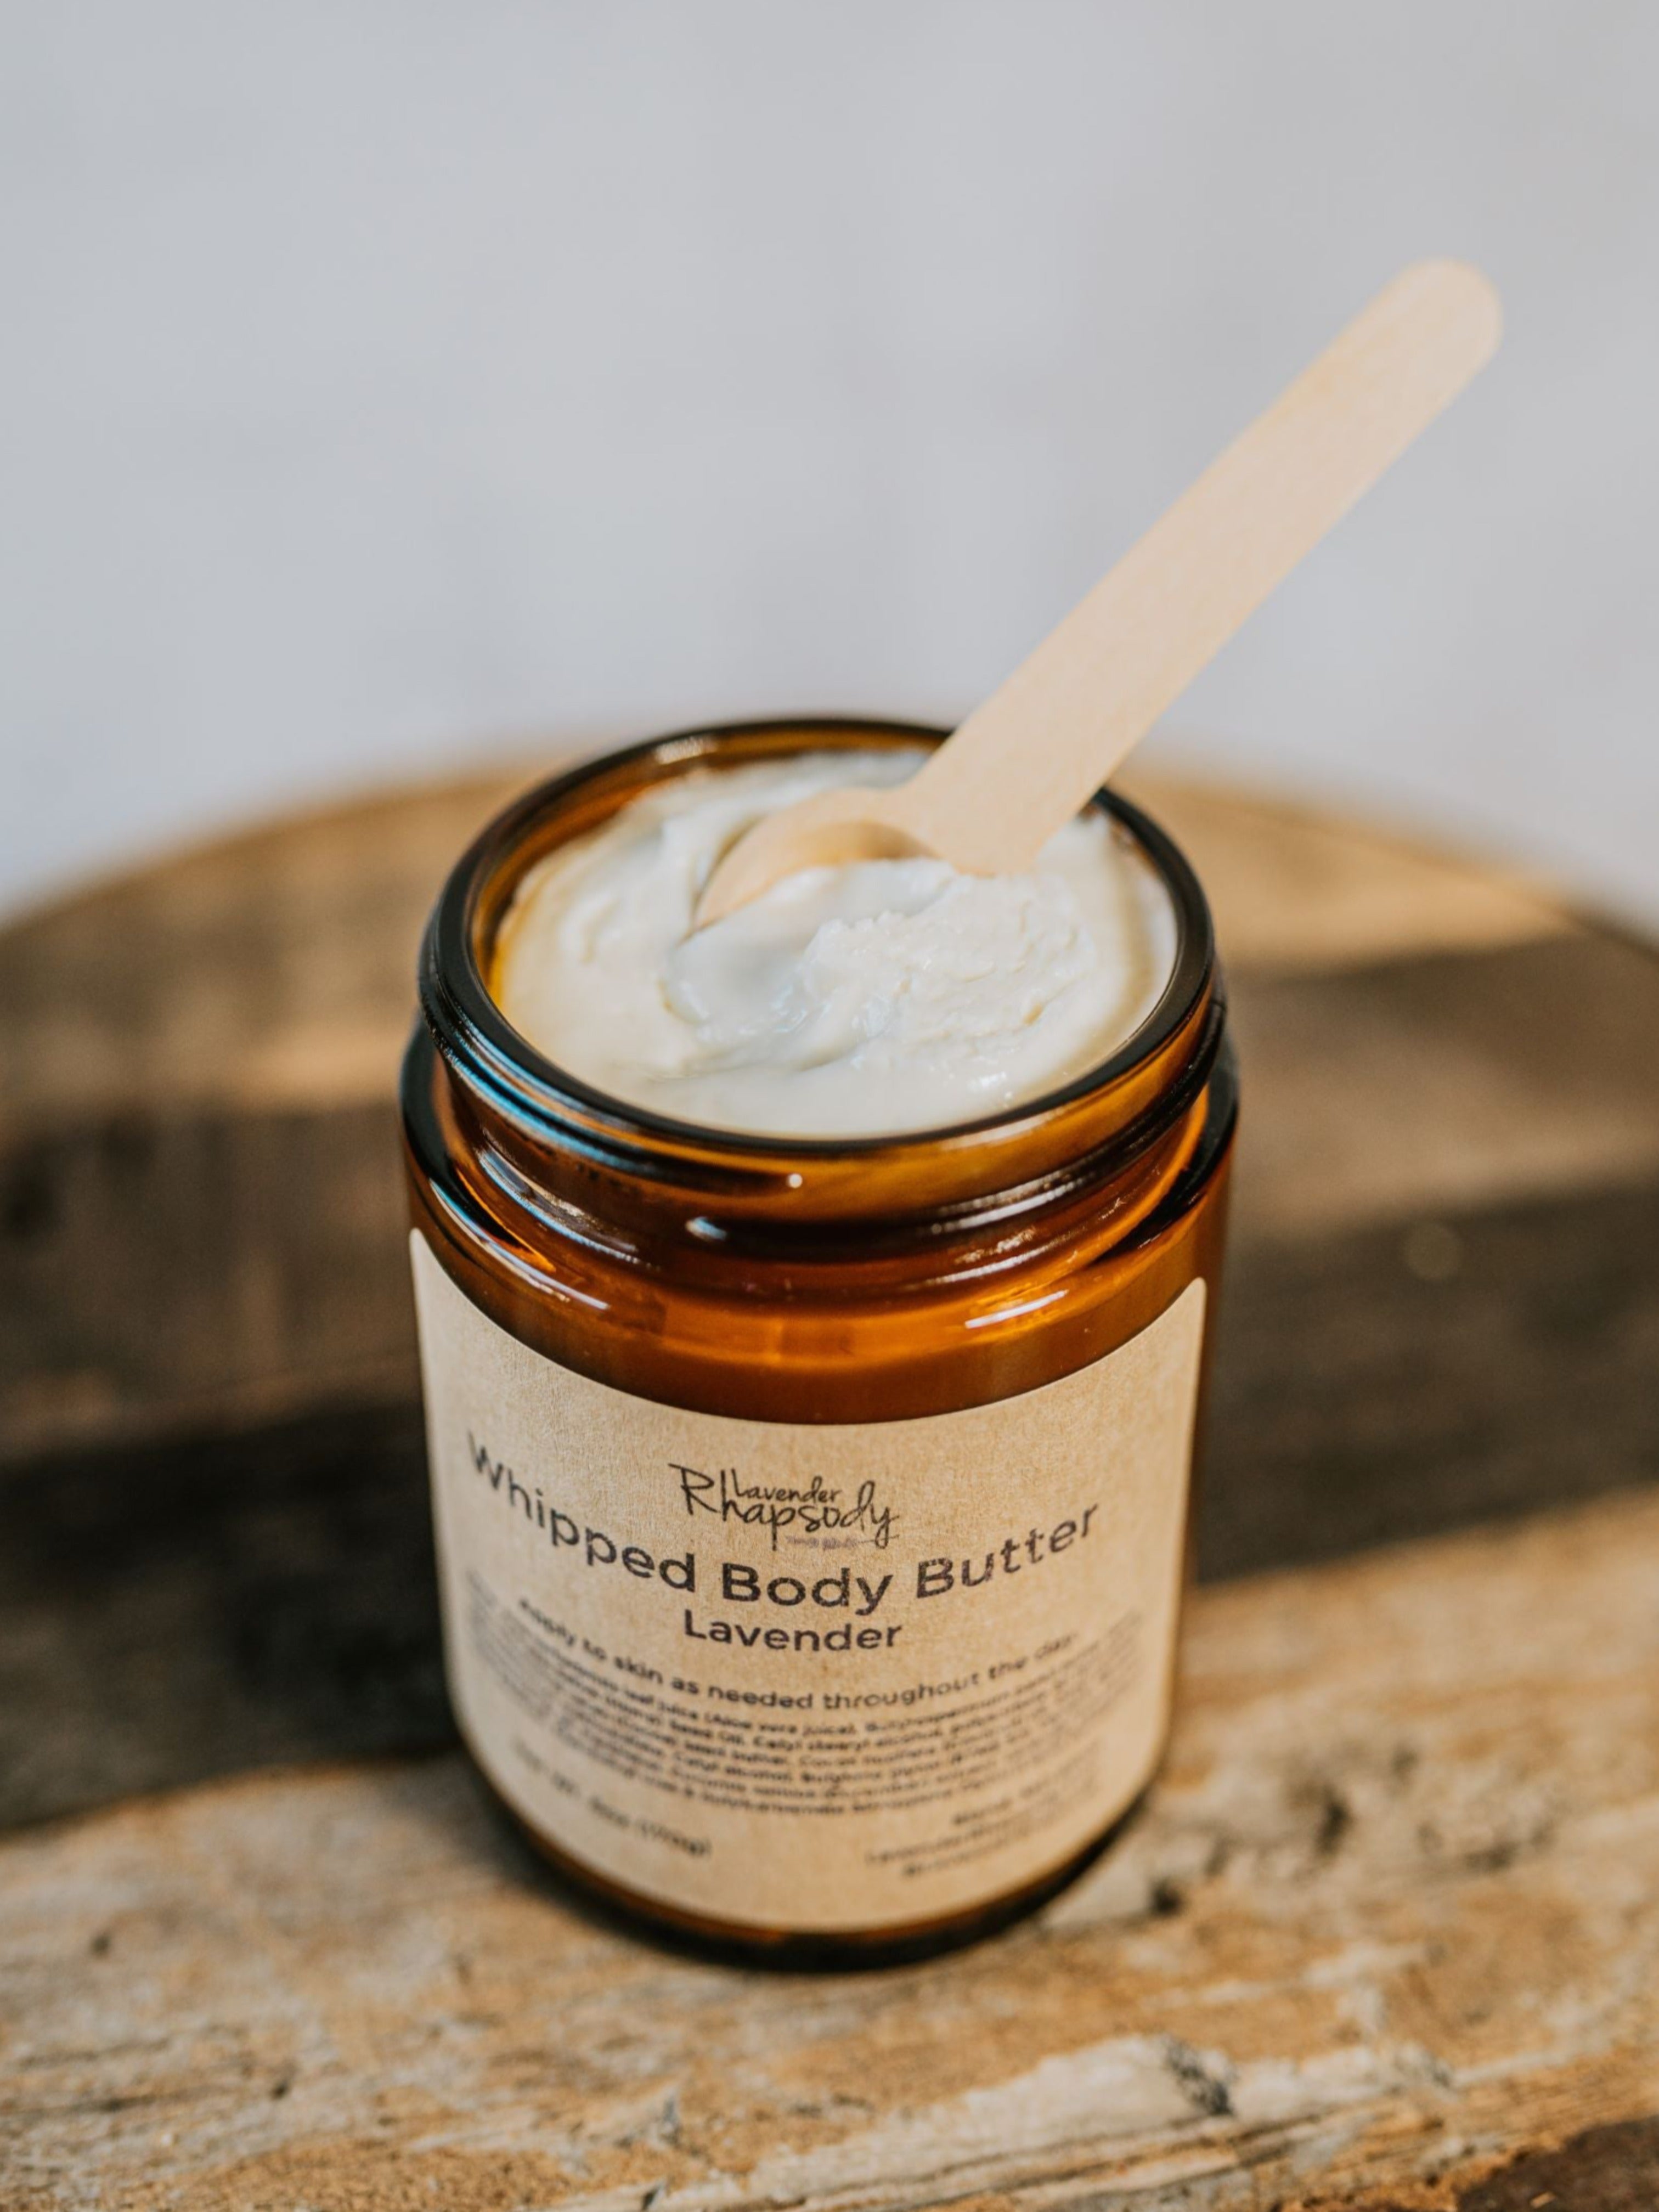 Whipped  Body Butter